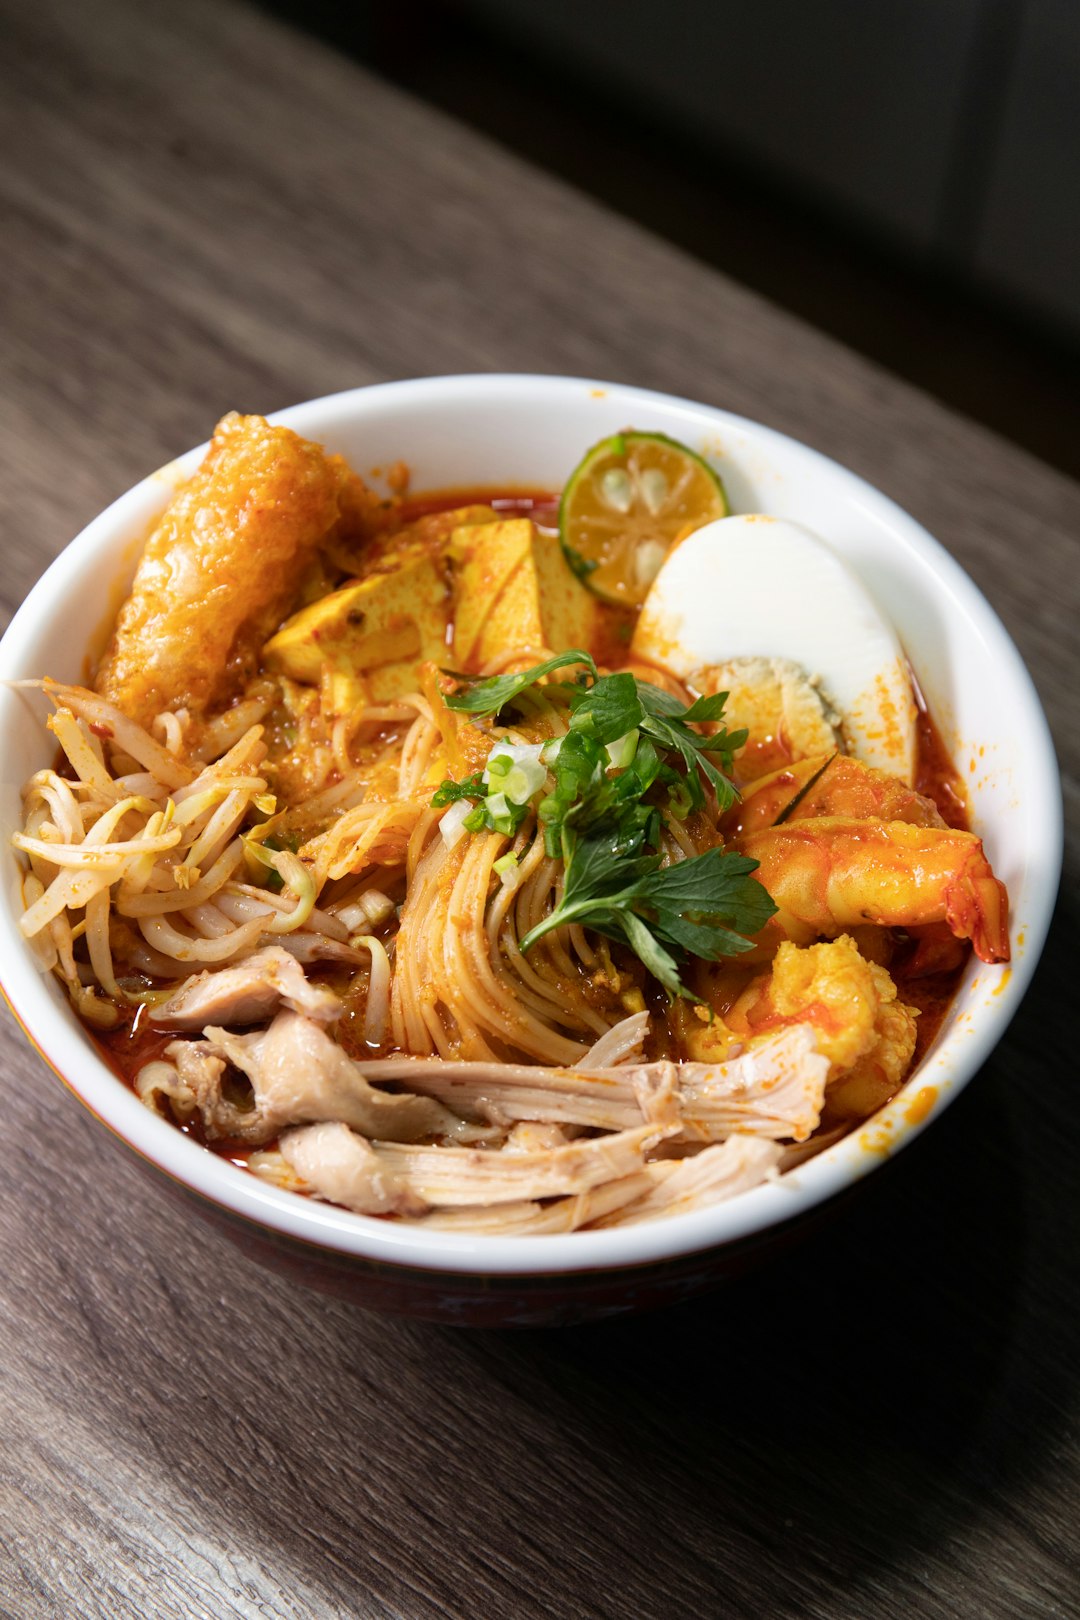 The Unique Blend of Flavors in Malaysia’s Laksa